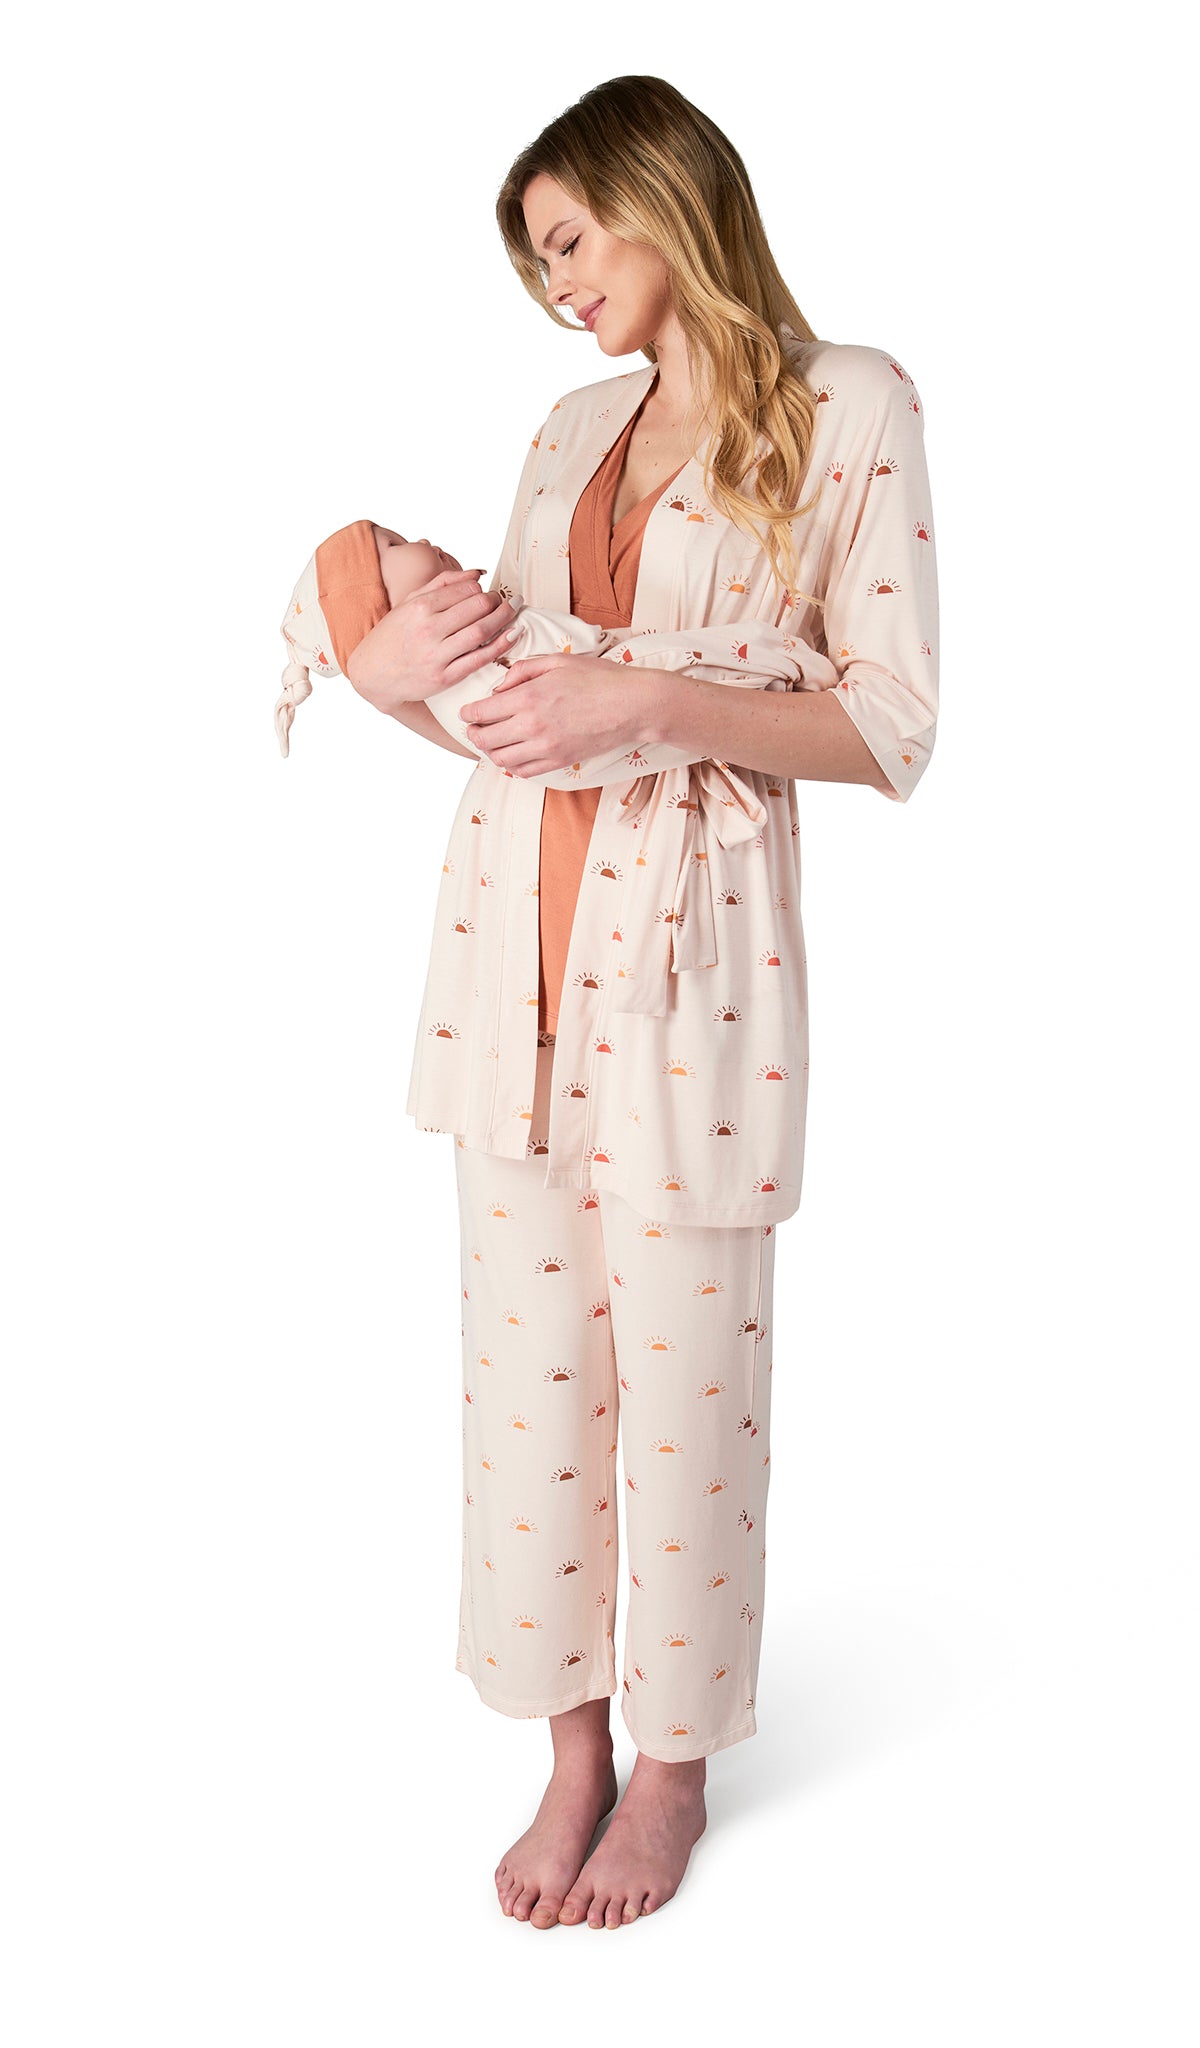 Sunrise Analise 5-Piece Set. Woman wearing 3/4 sleeve robe, tank top and pant while holding a baby wearing baby gown and knotted baby hat.